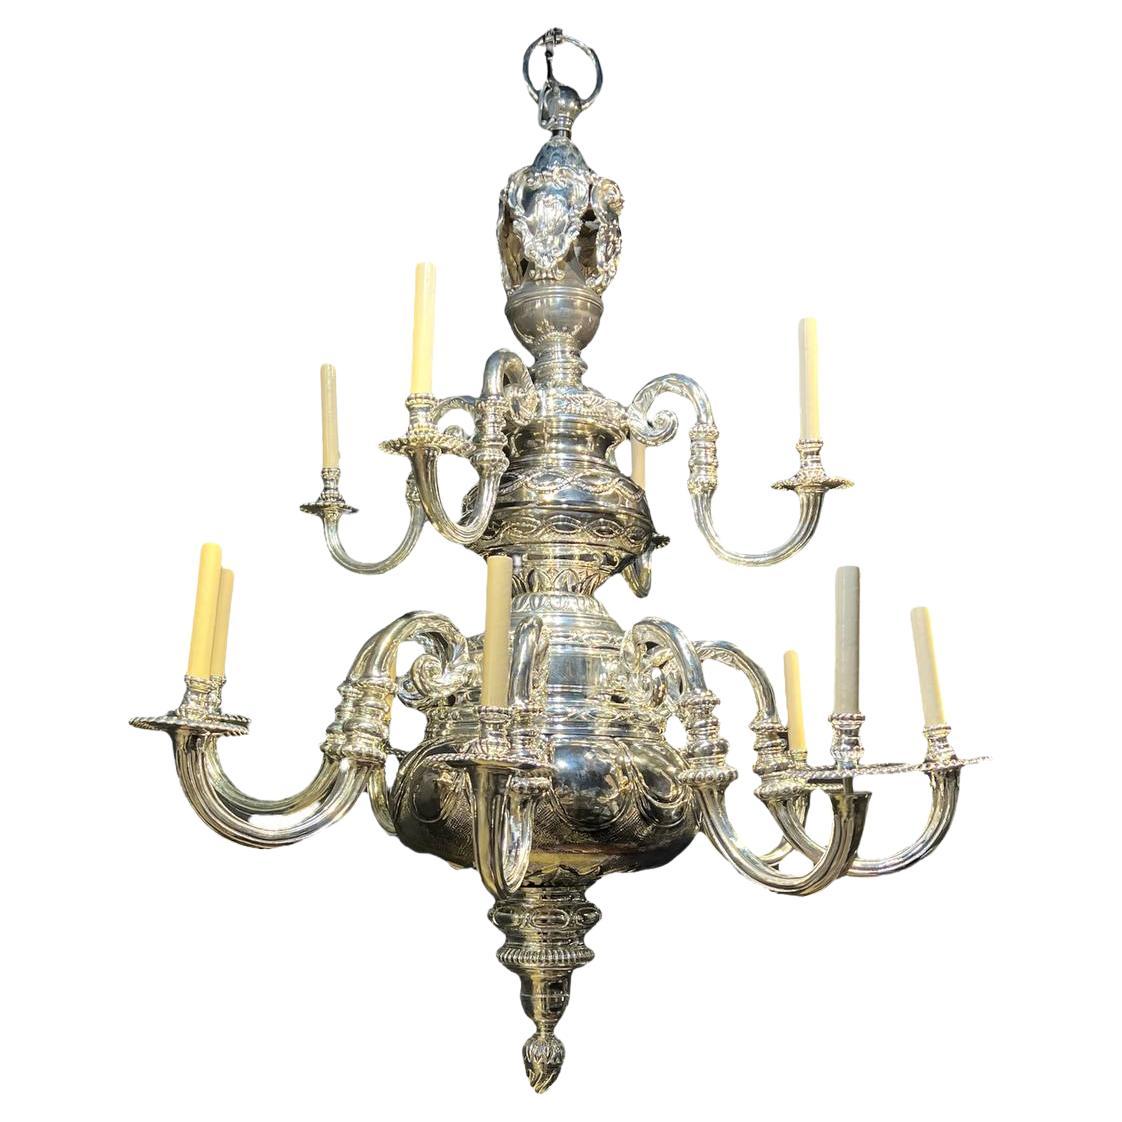 1900's Caldwell Large Silver Plated 12 Lights Chandelier with Engraved Details For Sale